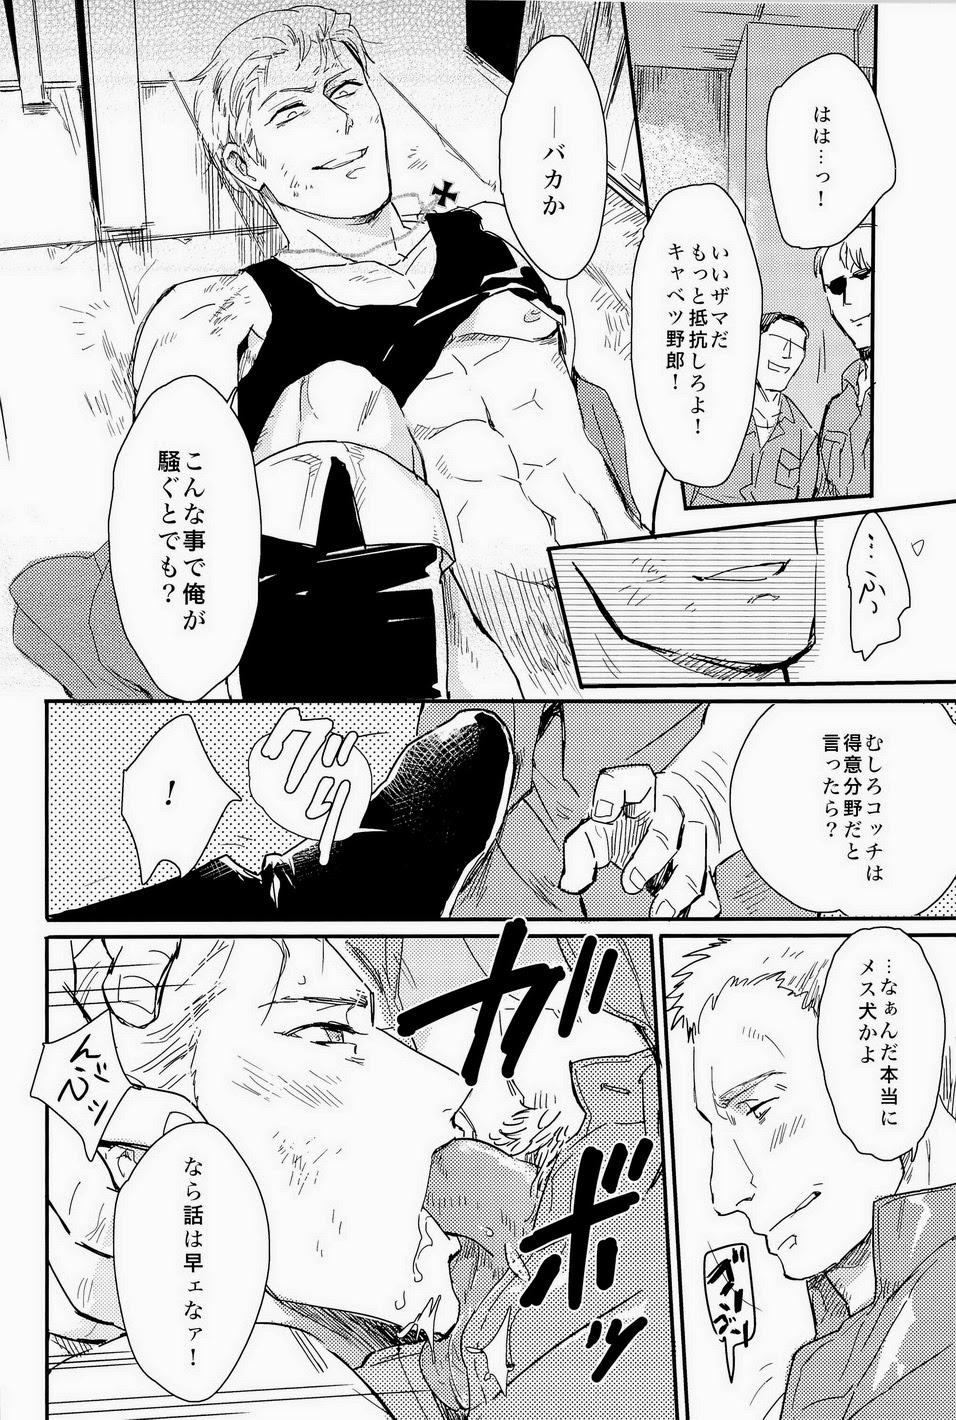 Oldyoung 細けぇことはいいんだよ - Axis powers hetalia Family - Page 12